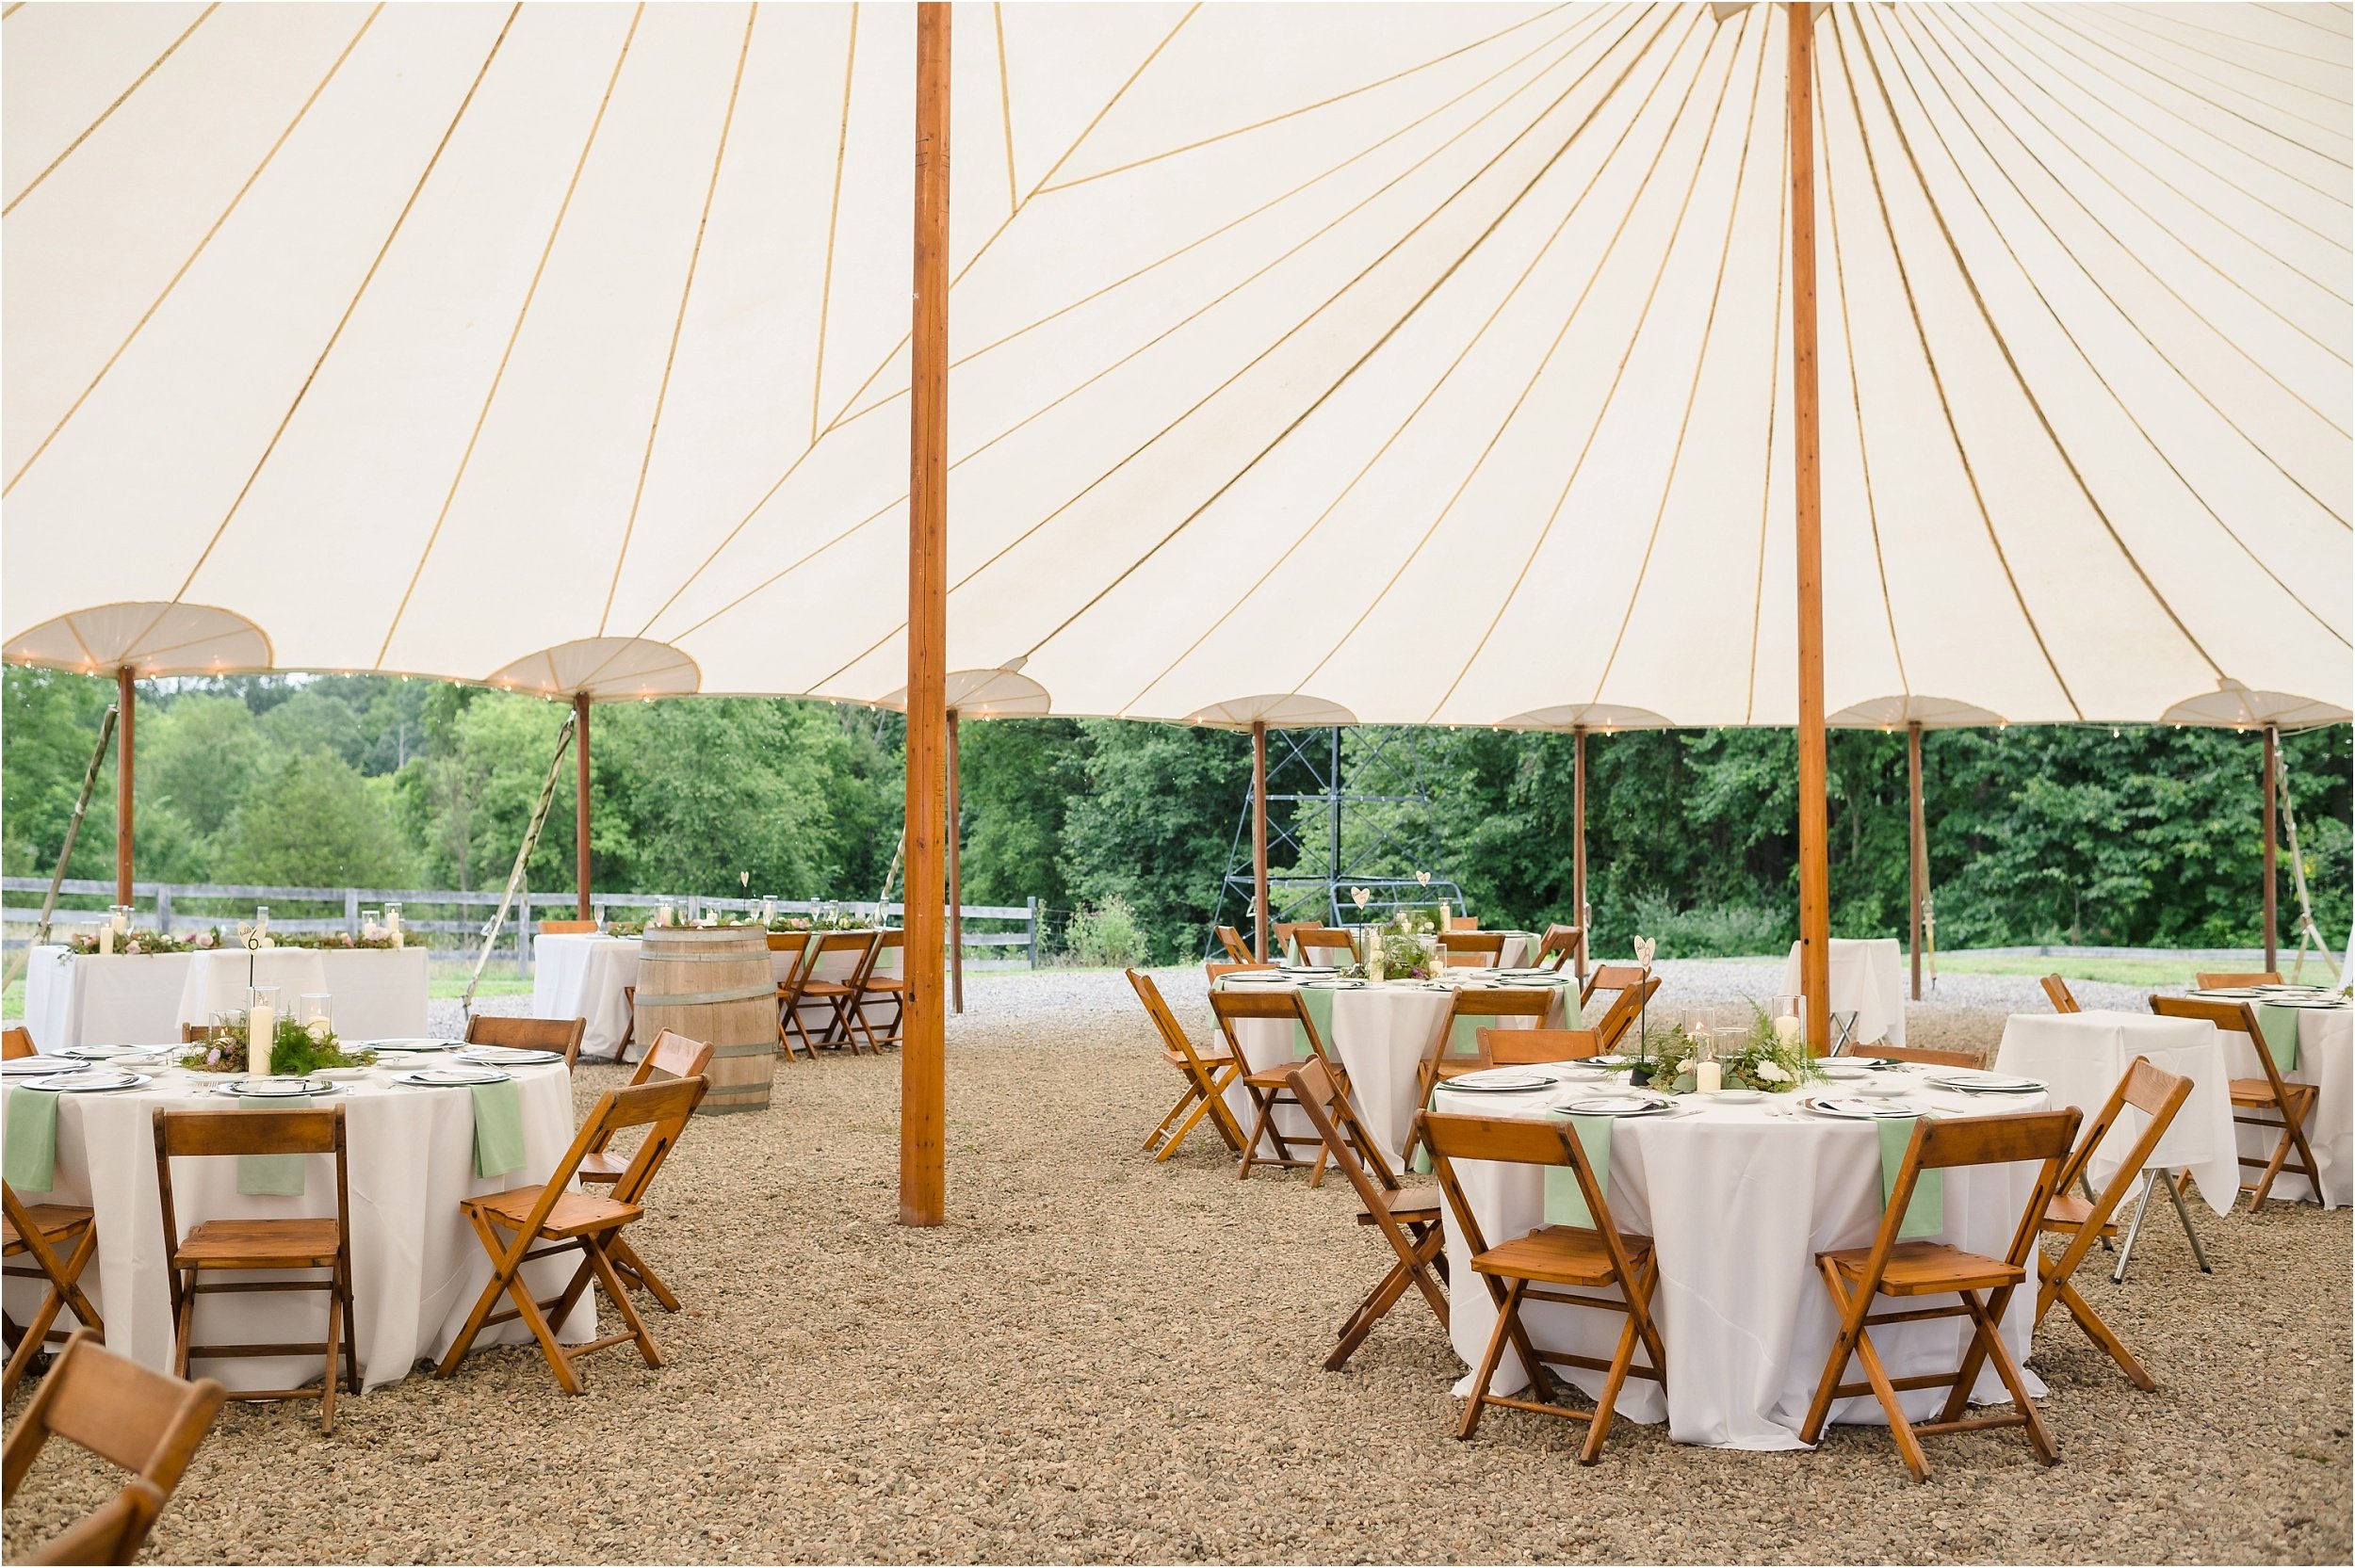   Tables and wood chairs set-up at a tent wedding reception.  